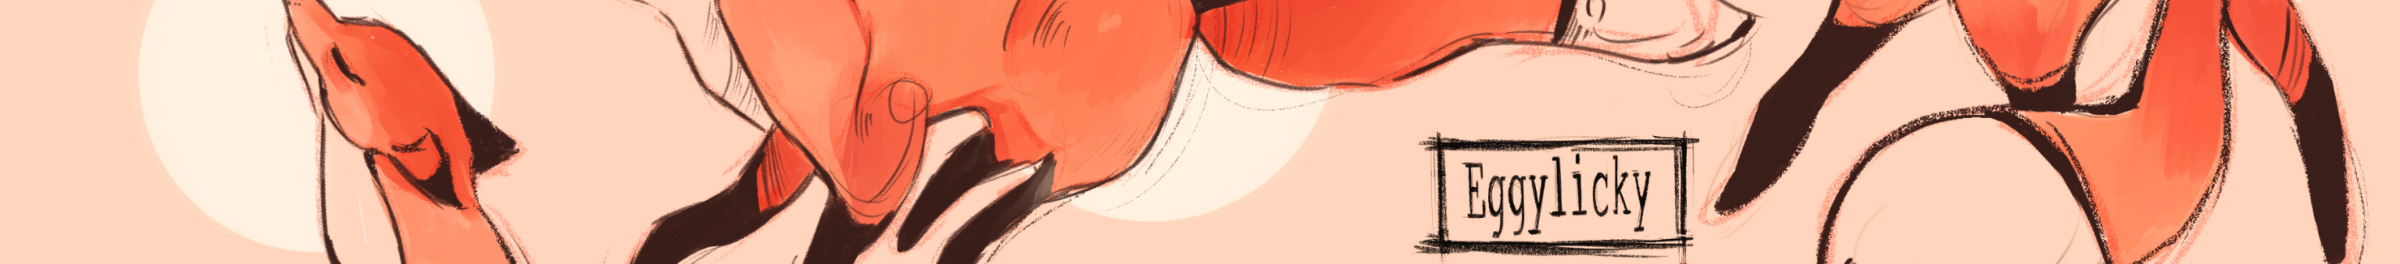 Eggylicky (Angelica)'s profile banner